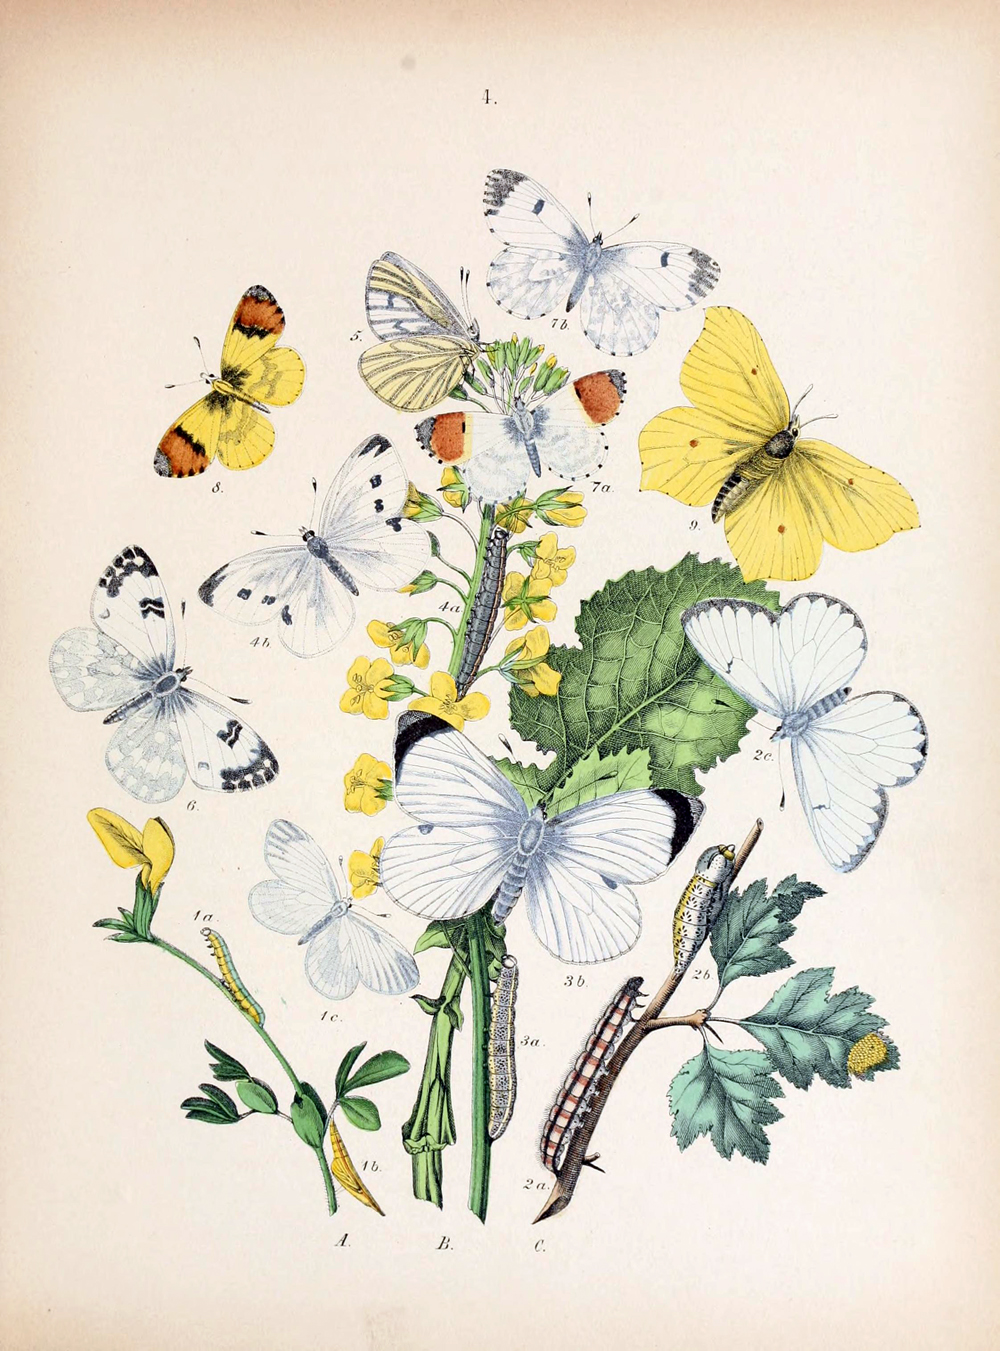 erflies, erflies and other plants grow in this drawing